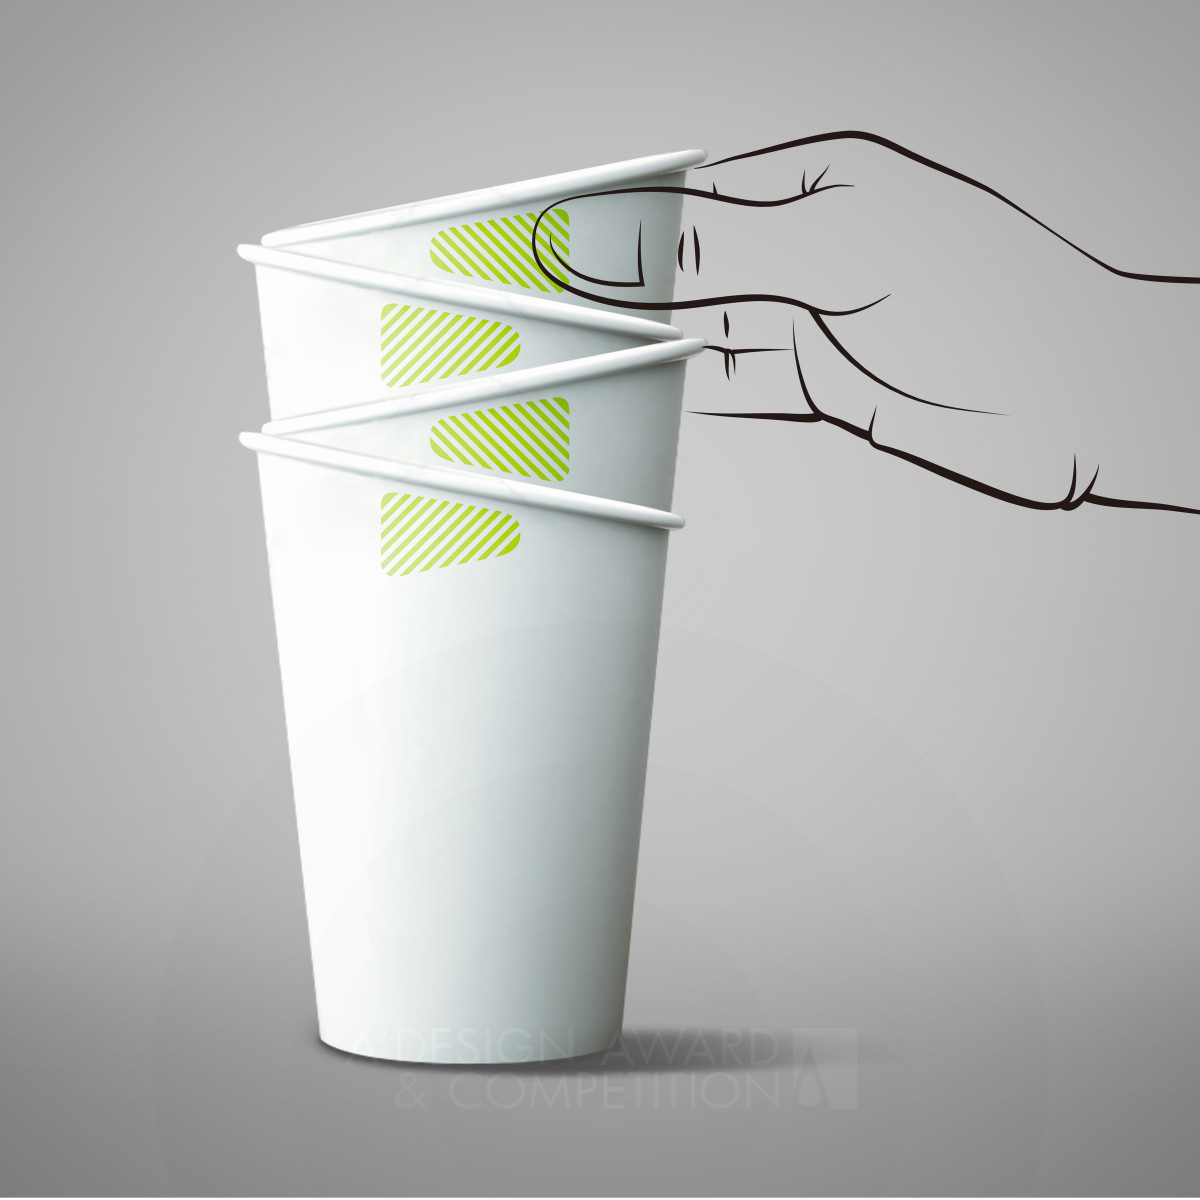 Clean-Rim paper cup paper cup by Yinshuai Zhang